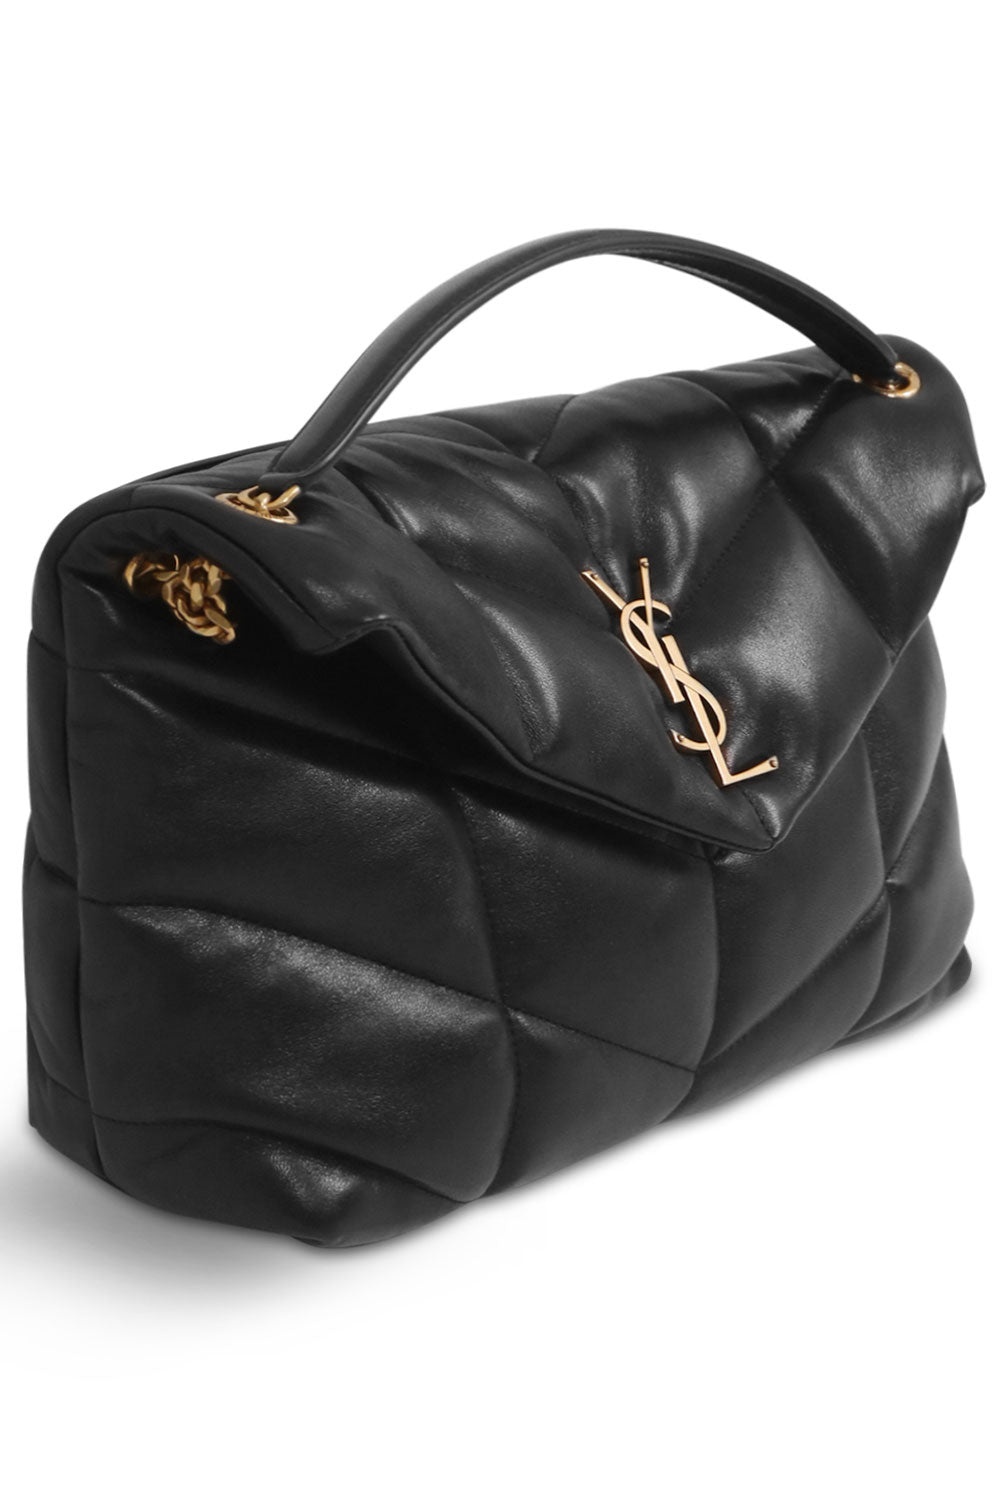 LOULOU SMALL PUFFER BAG | BLACK/GOLD - 3